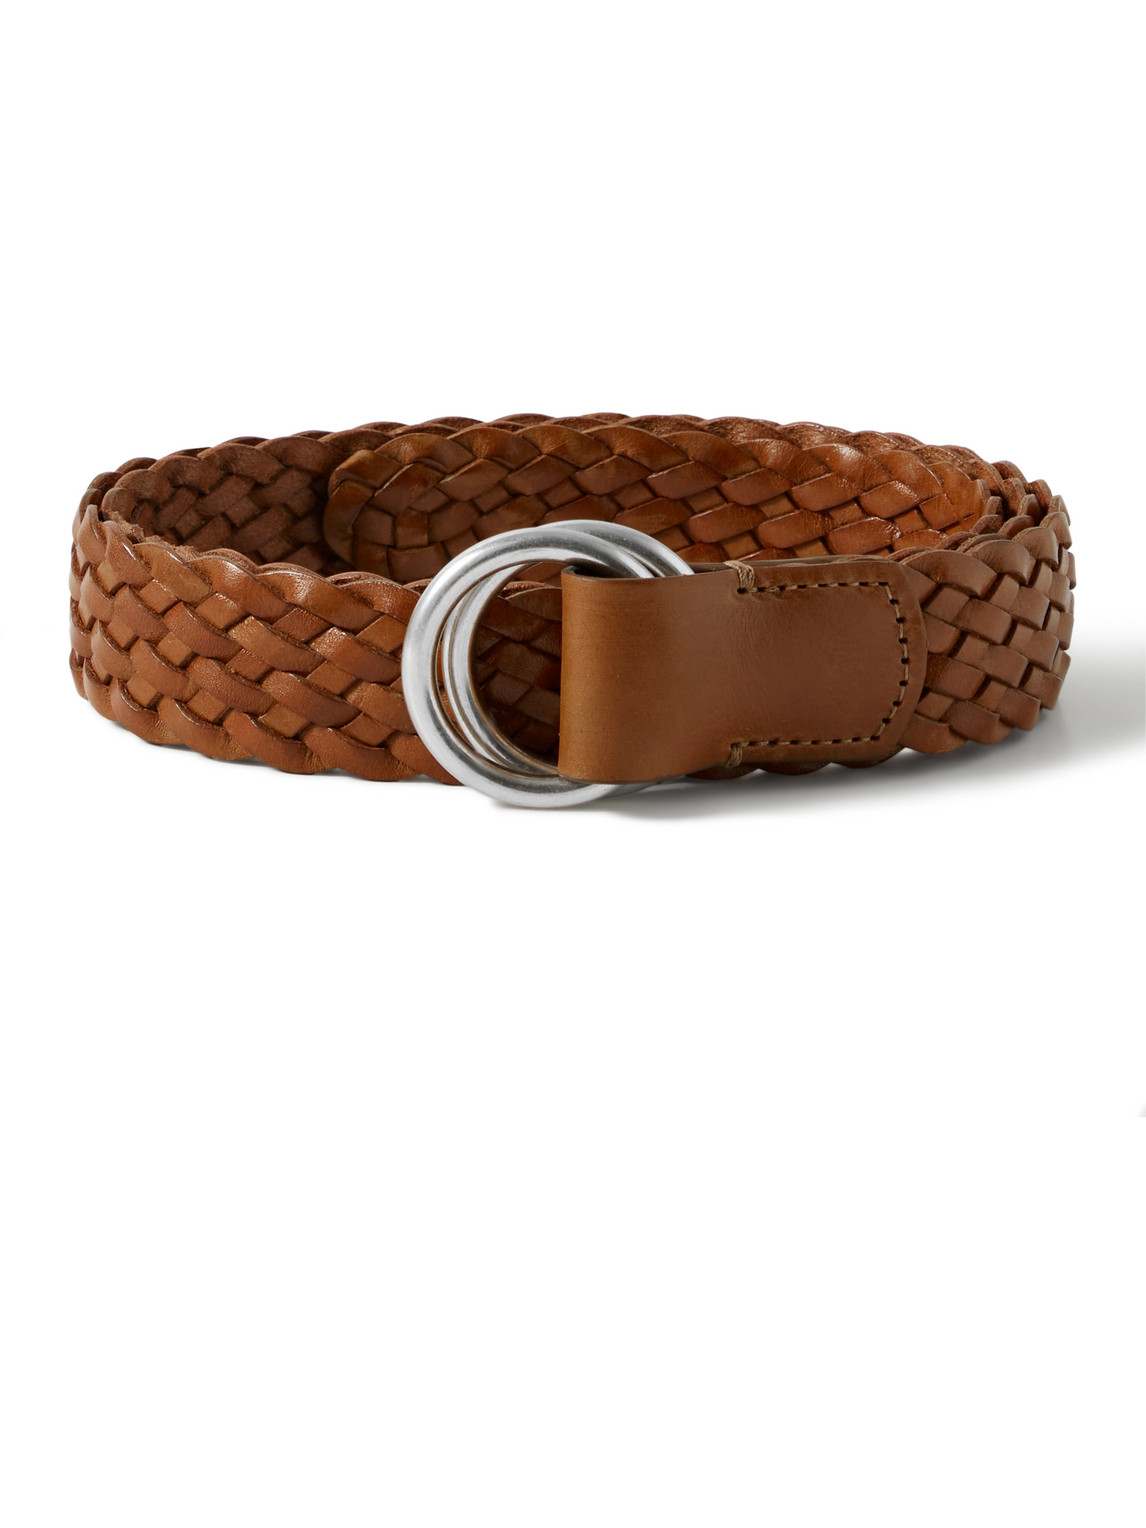 Anderson's 3cm Woven Leather Belt In Brown